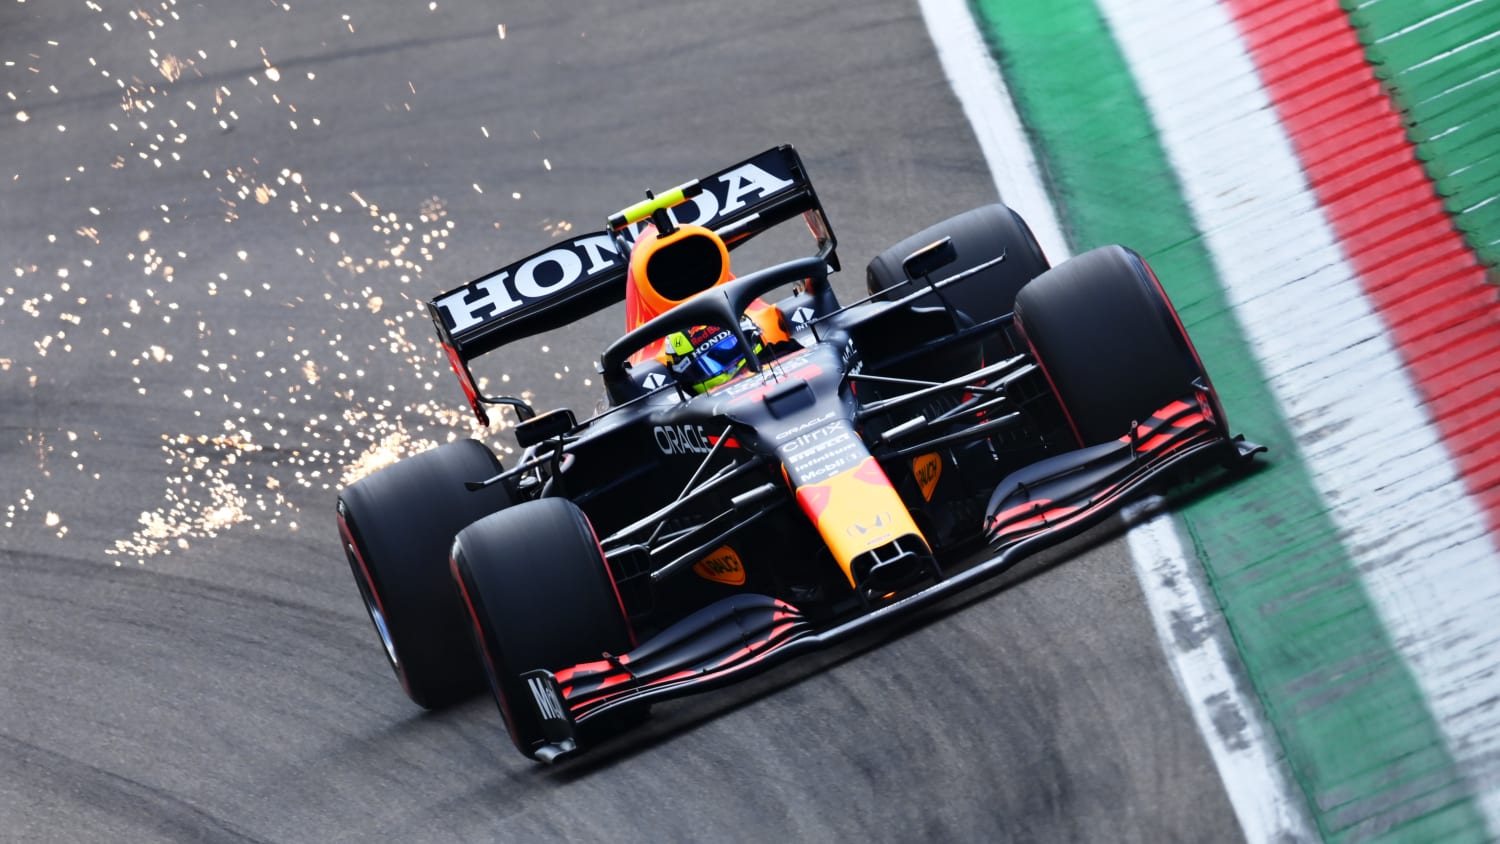 Sergio Perez On The Front Row With Max Verstappen P3